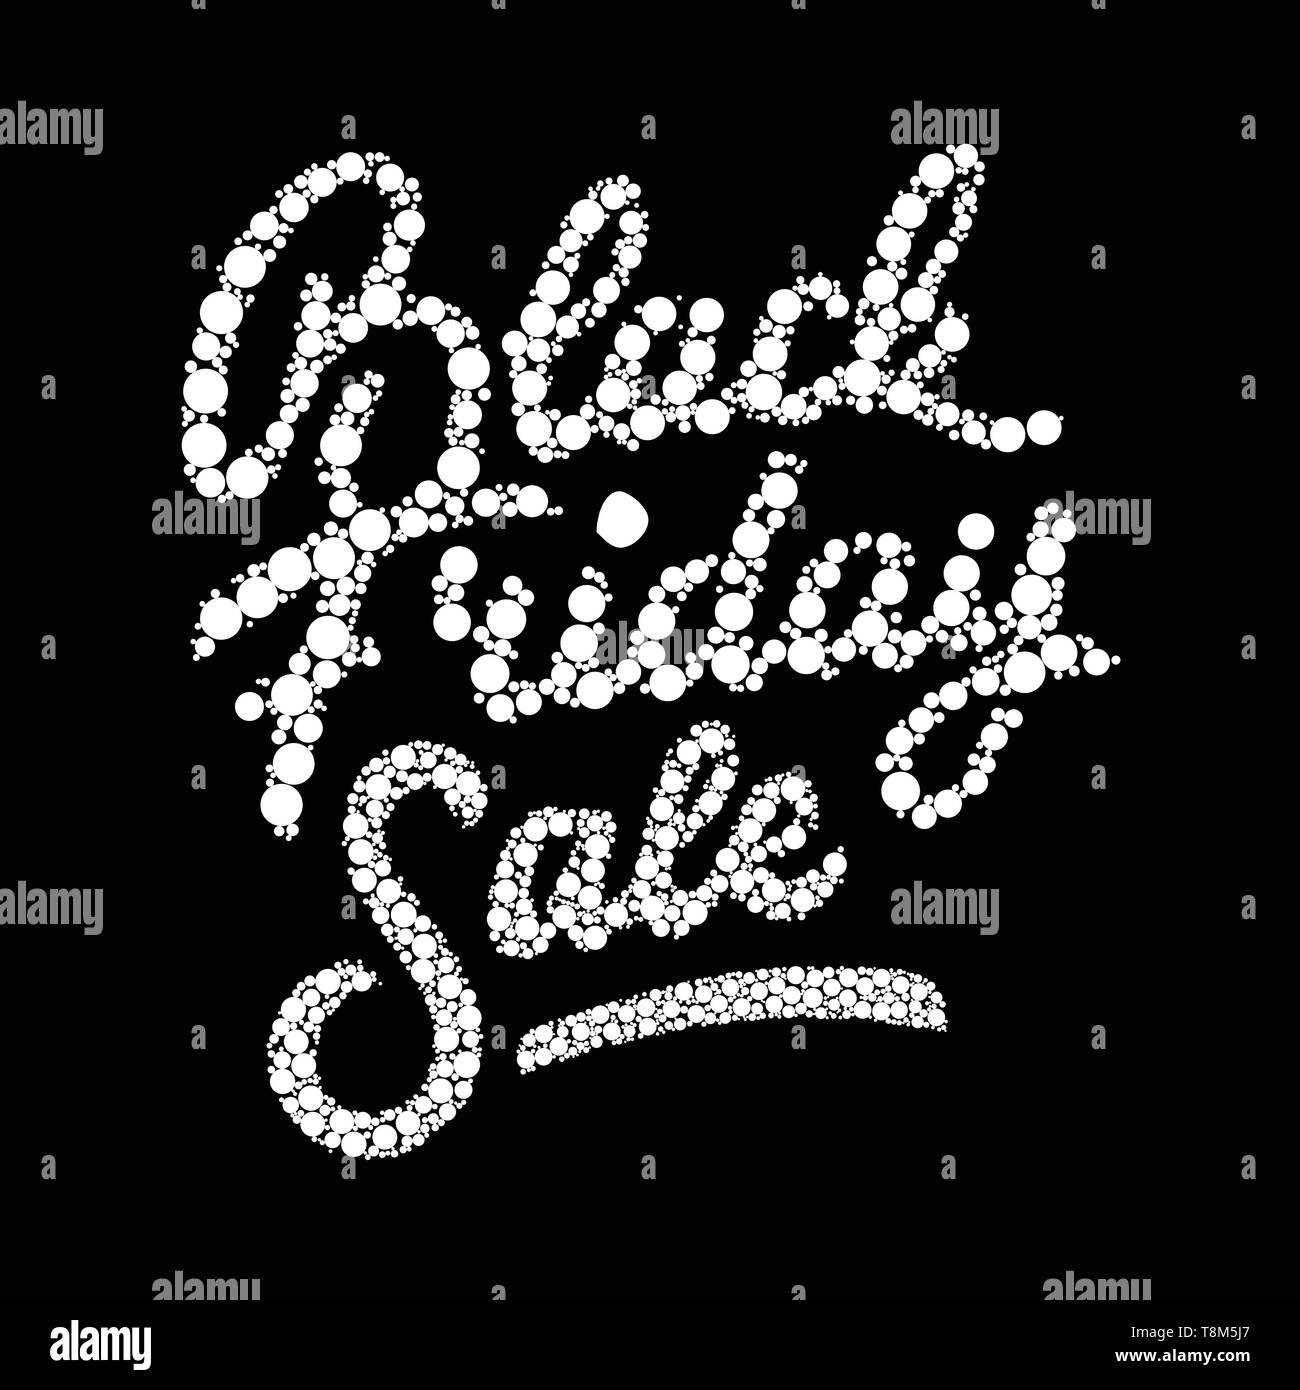 Abstract vector black Friday sale layout background.For art template design Stock Vector